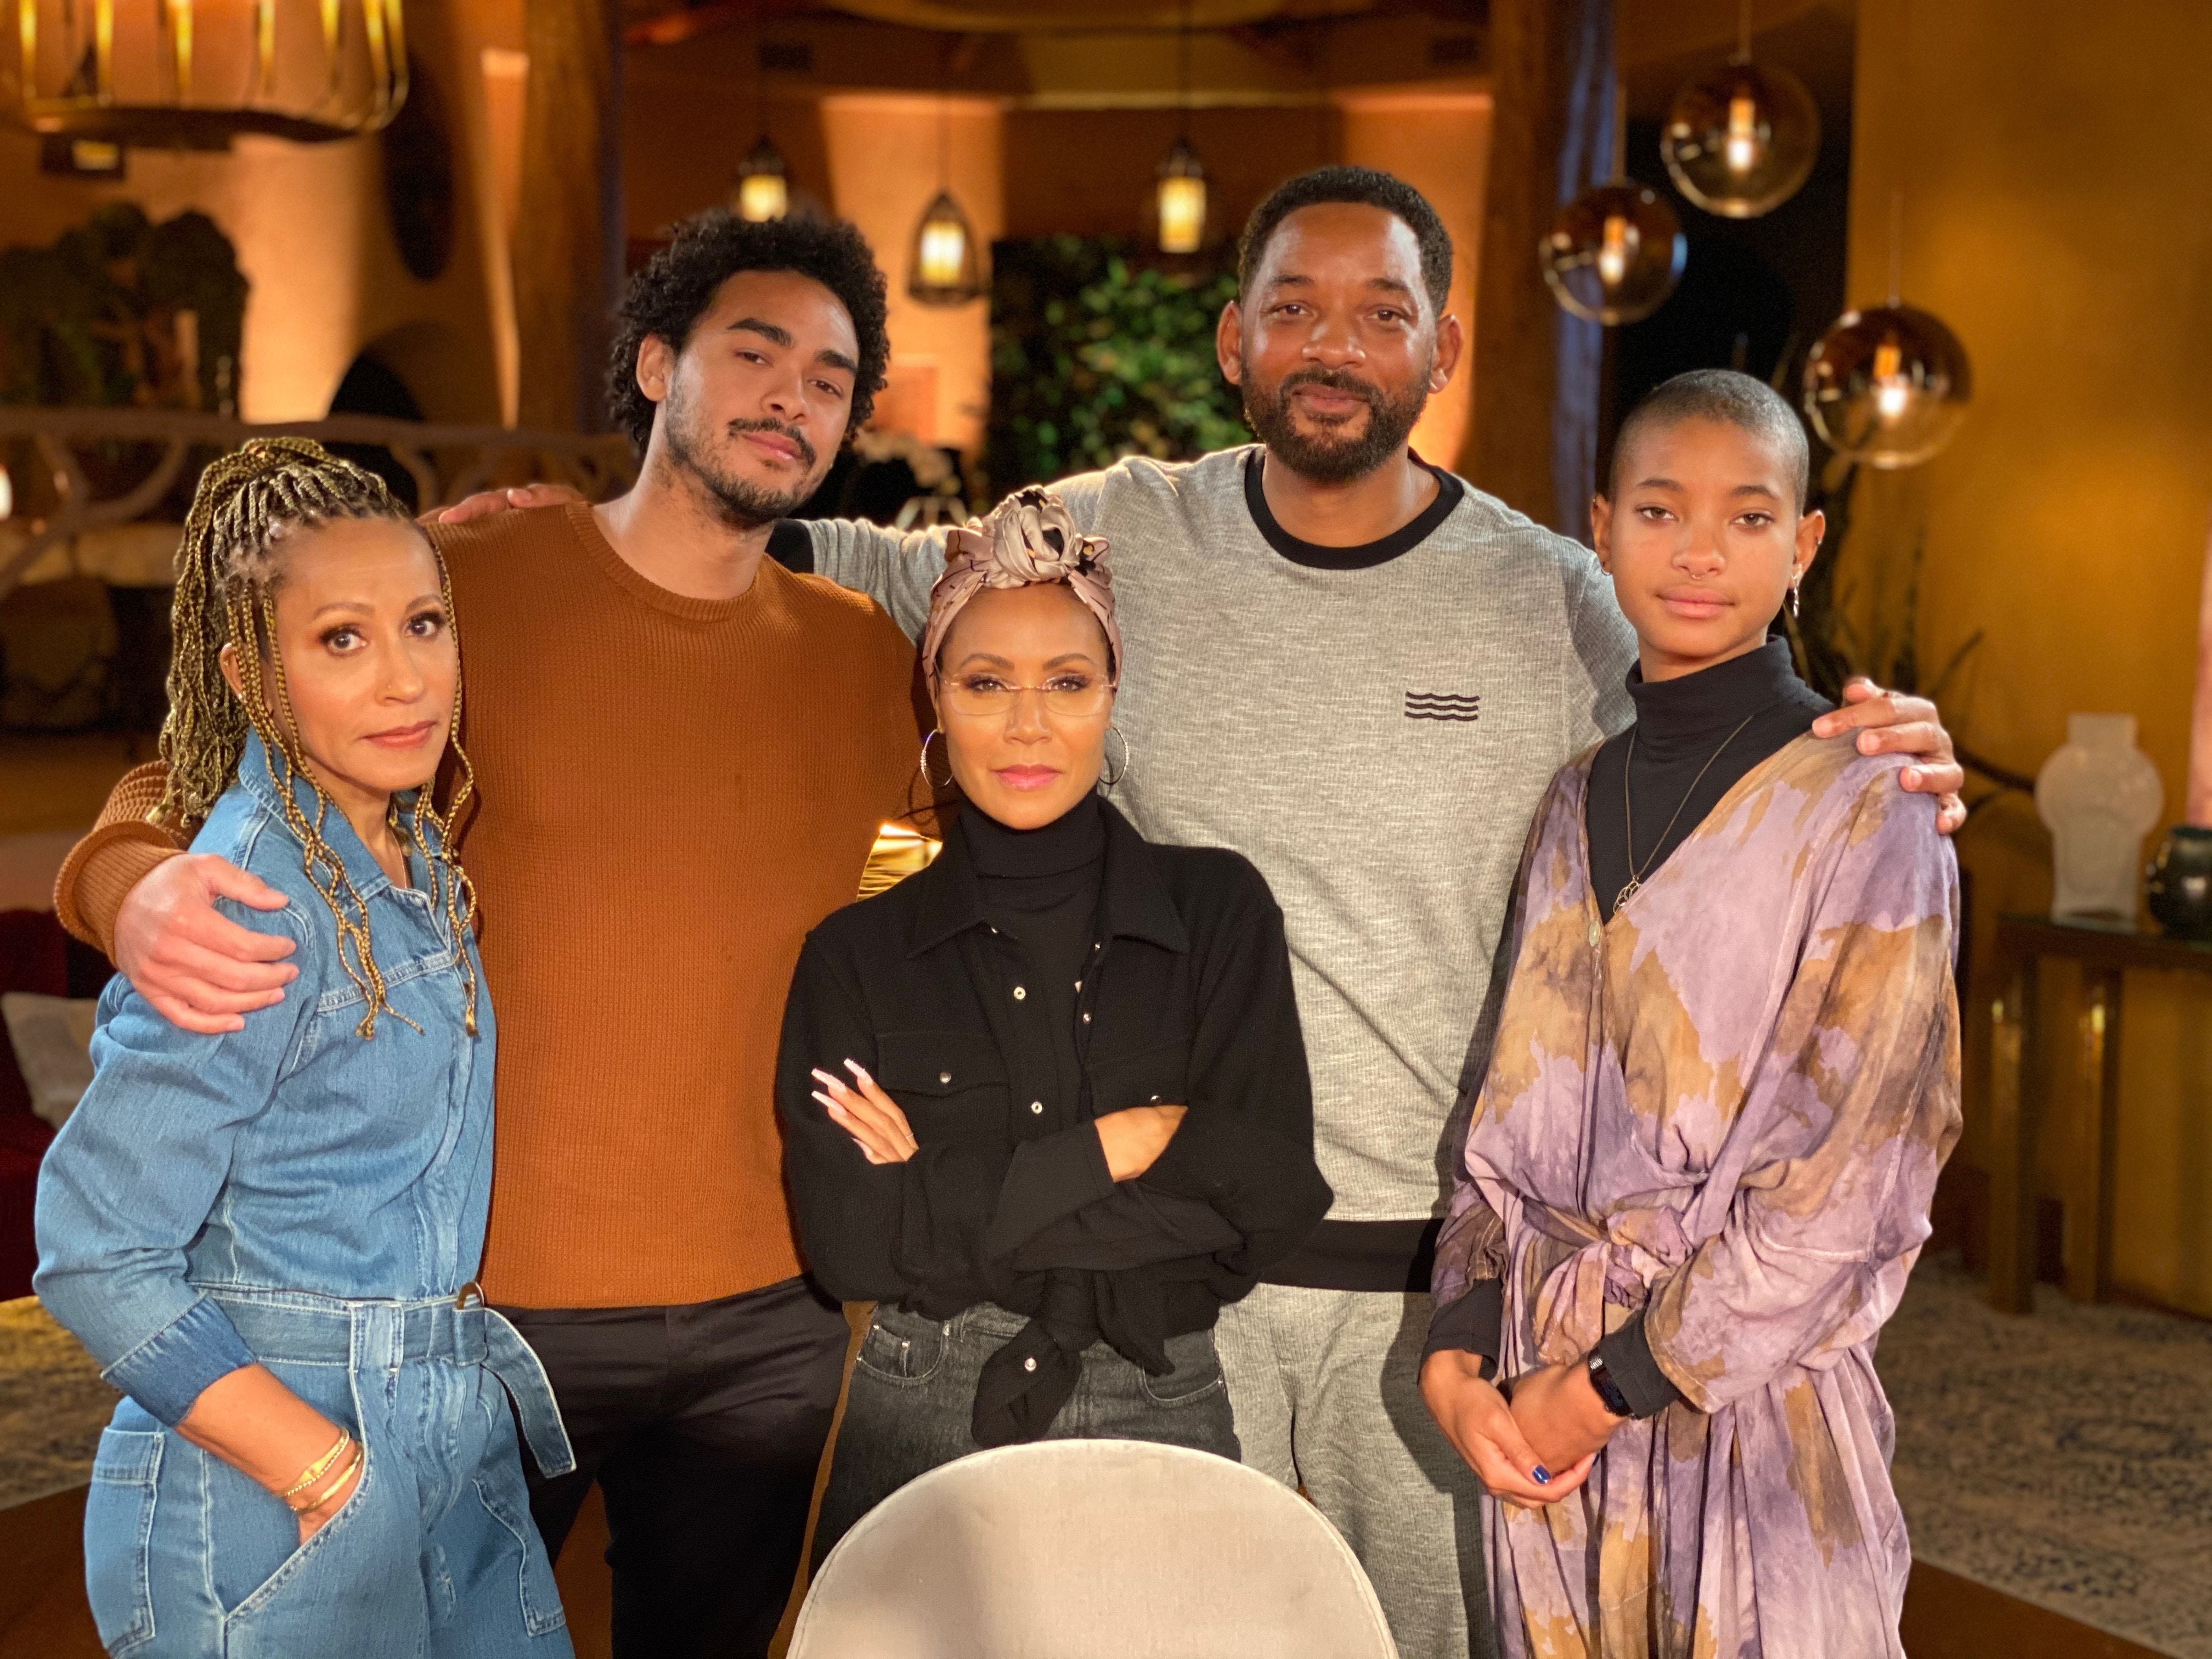 Will Smith Includes Us In A Family Meeting on ‘Red Table Talk’ To Discuss COVID-19